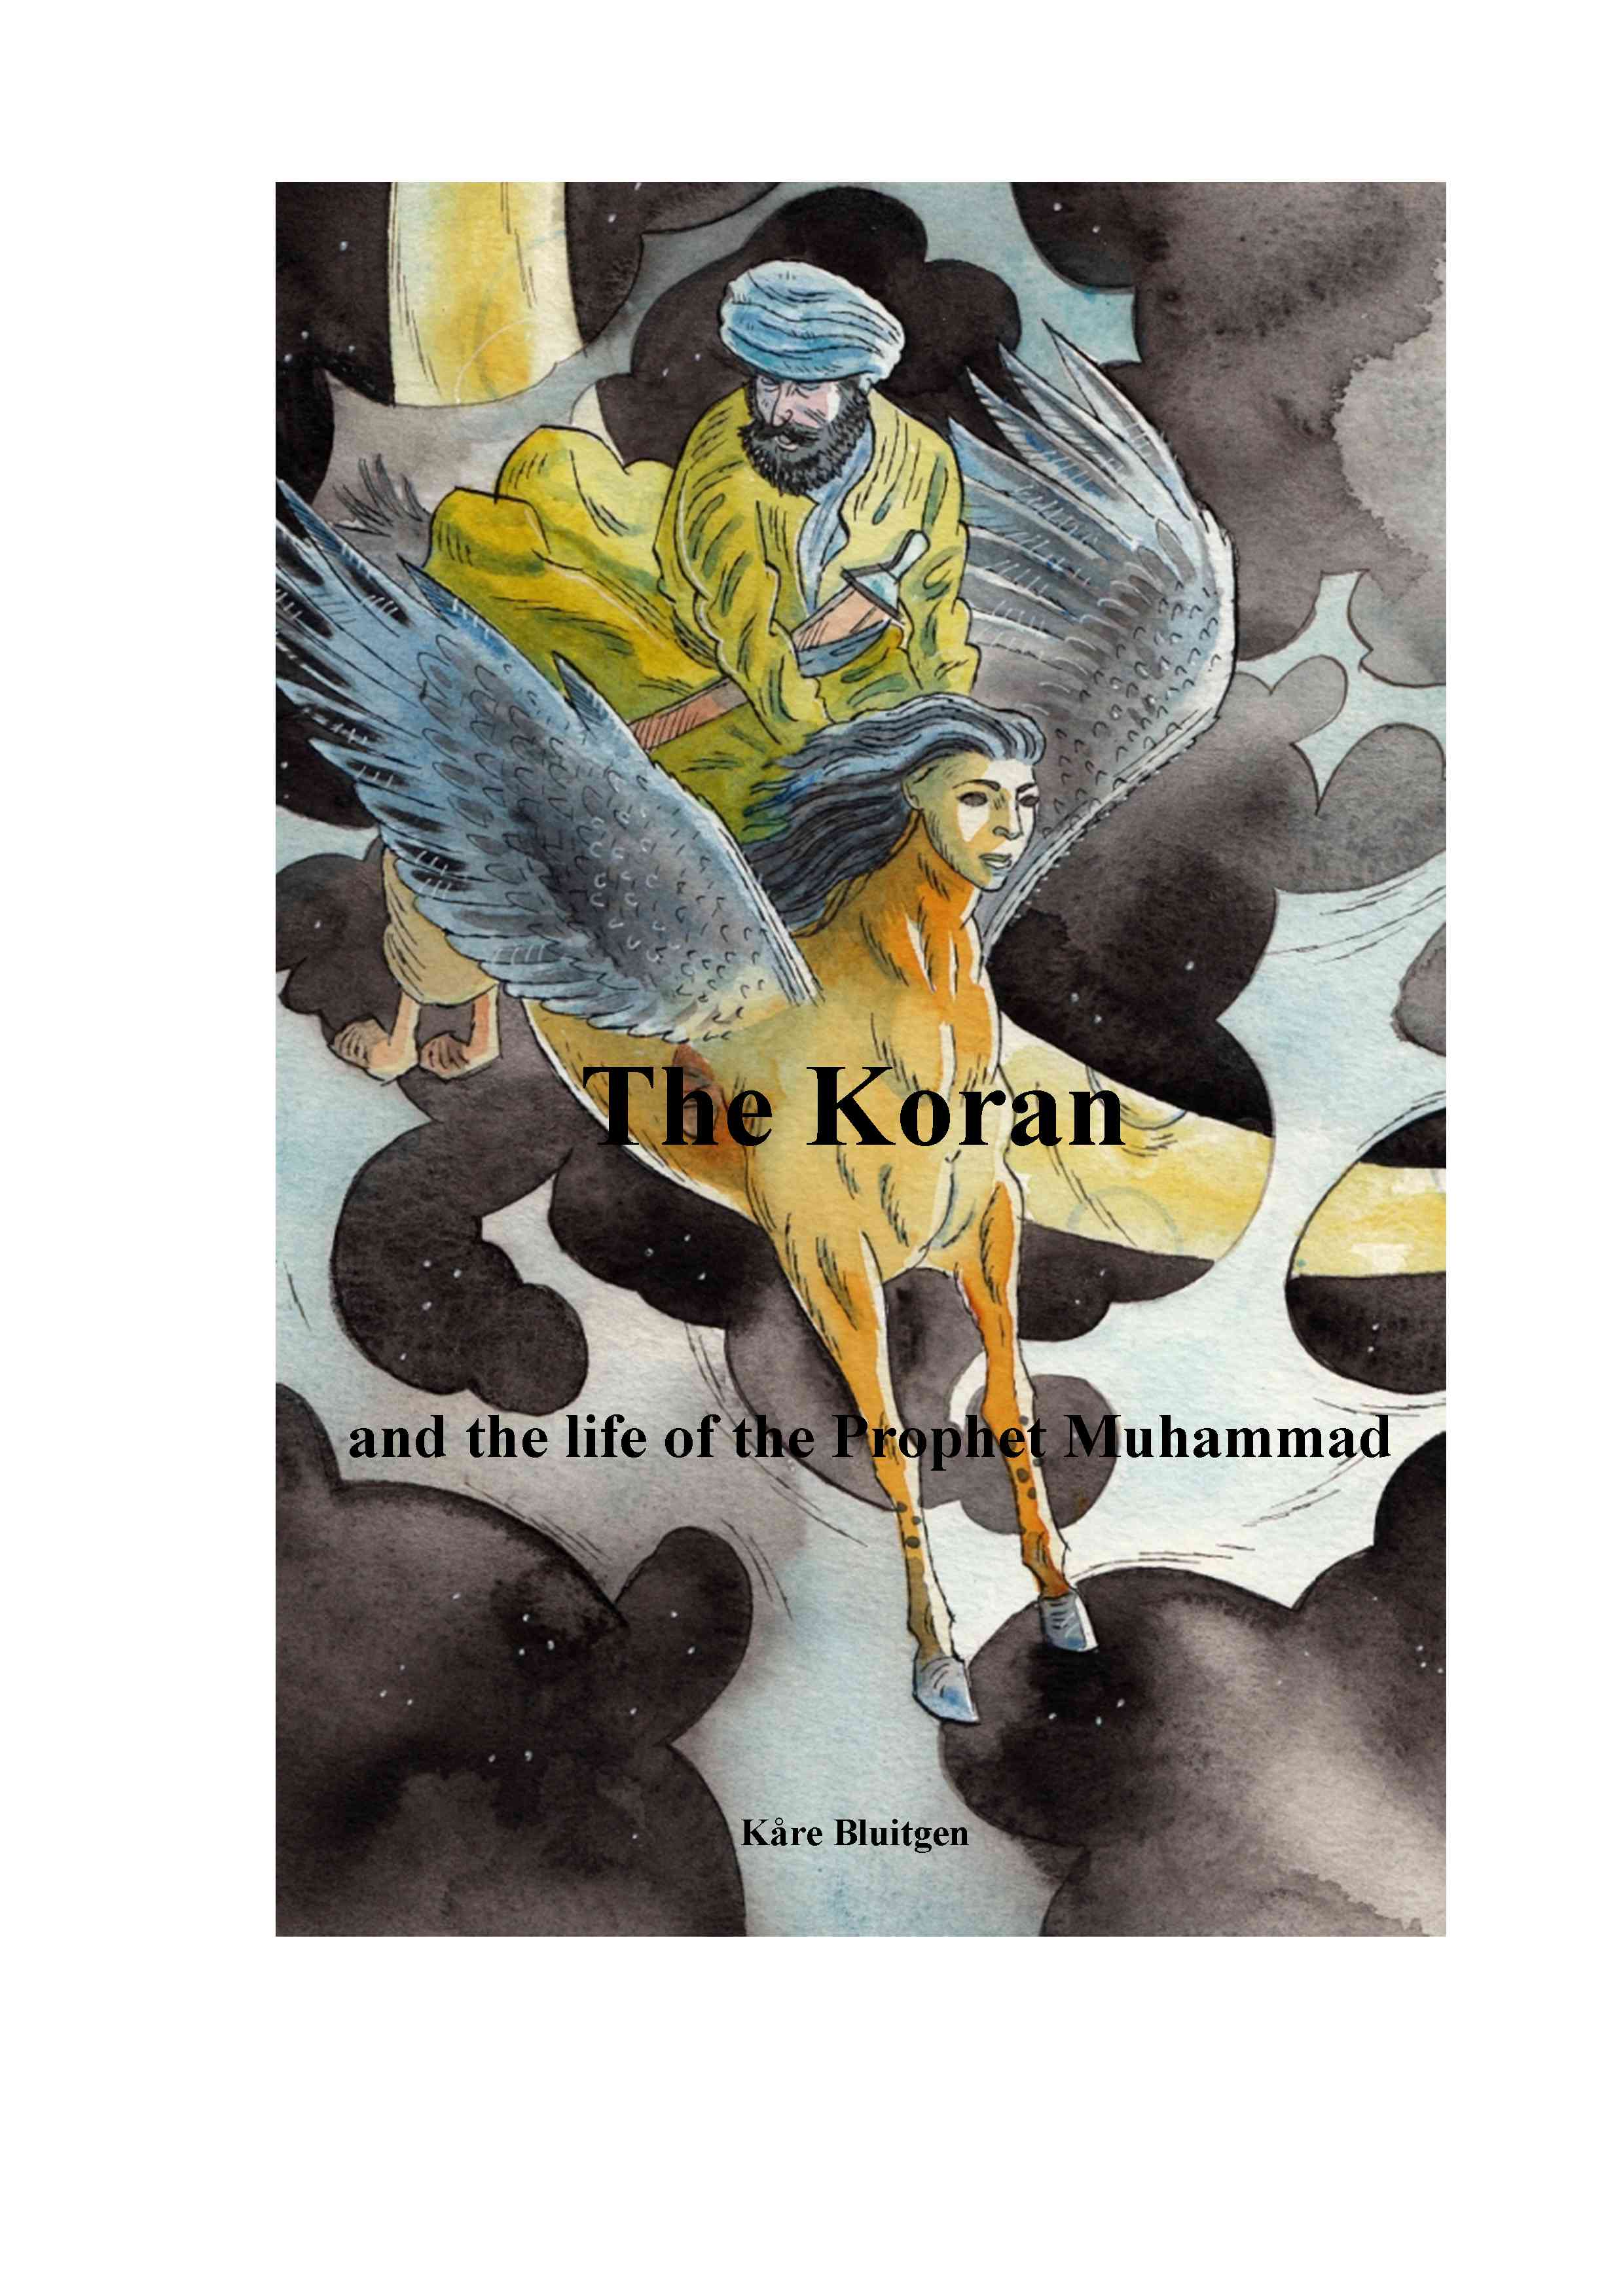 The Koran and the life of the Prophet Muhammad